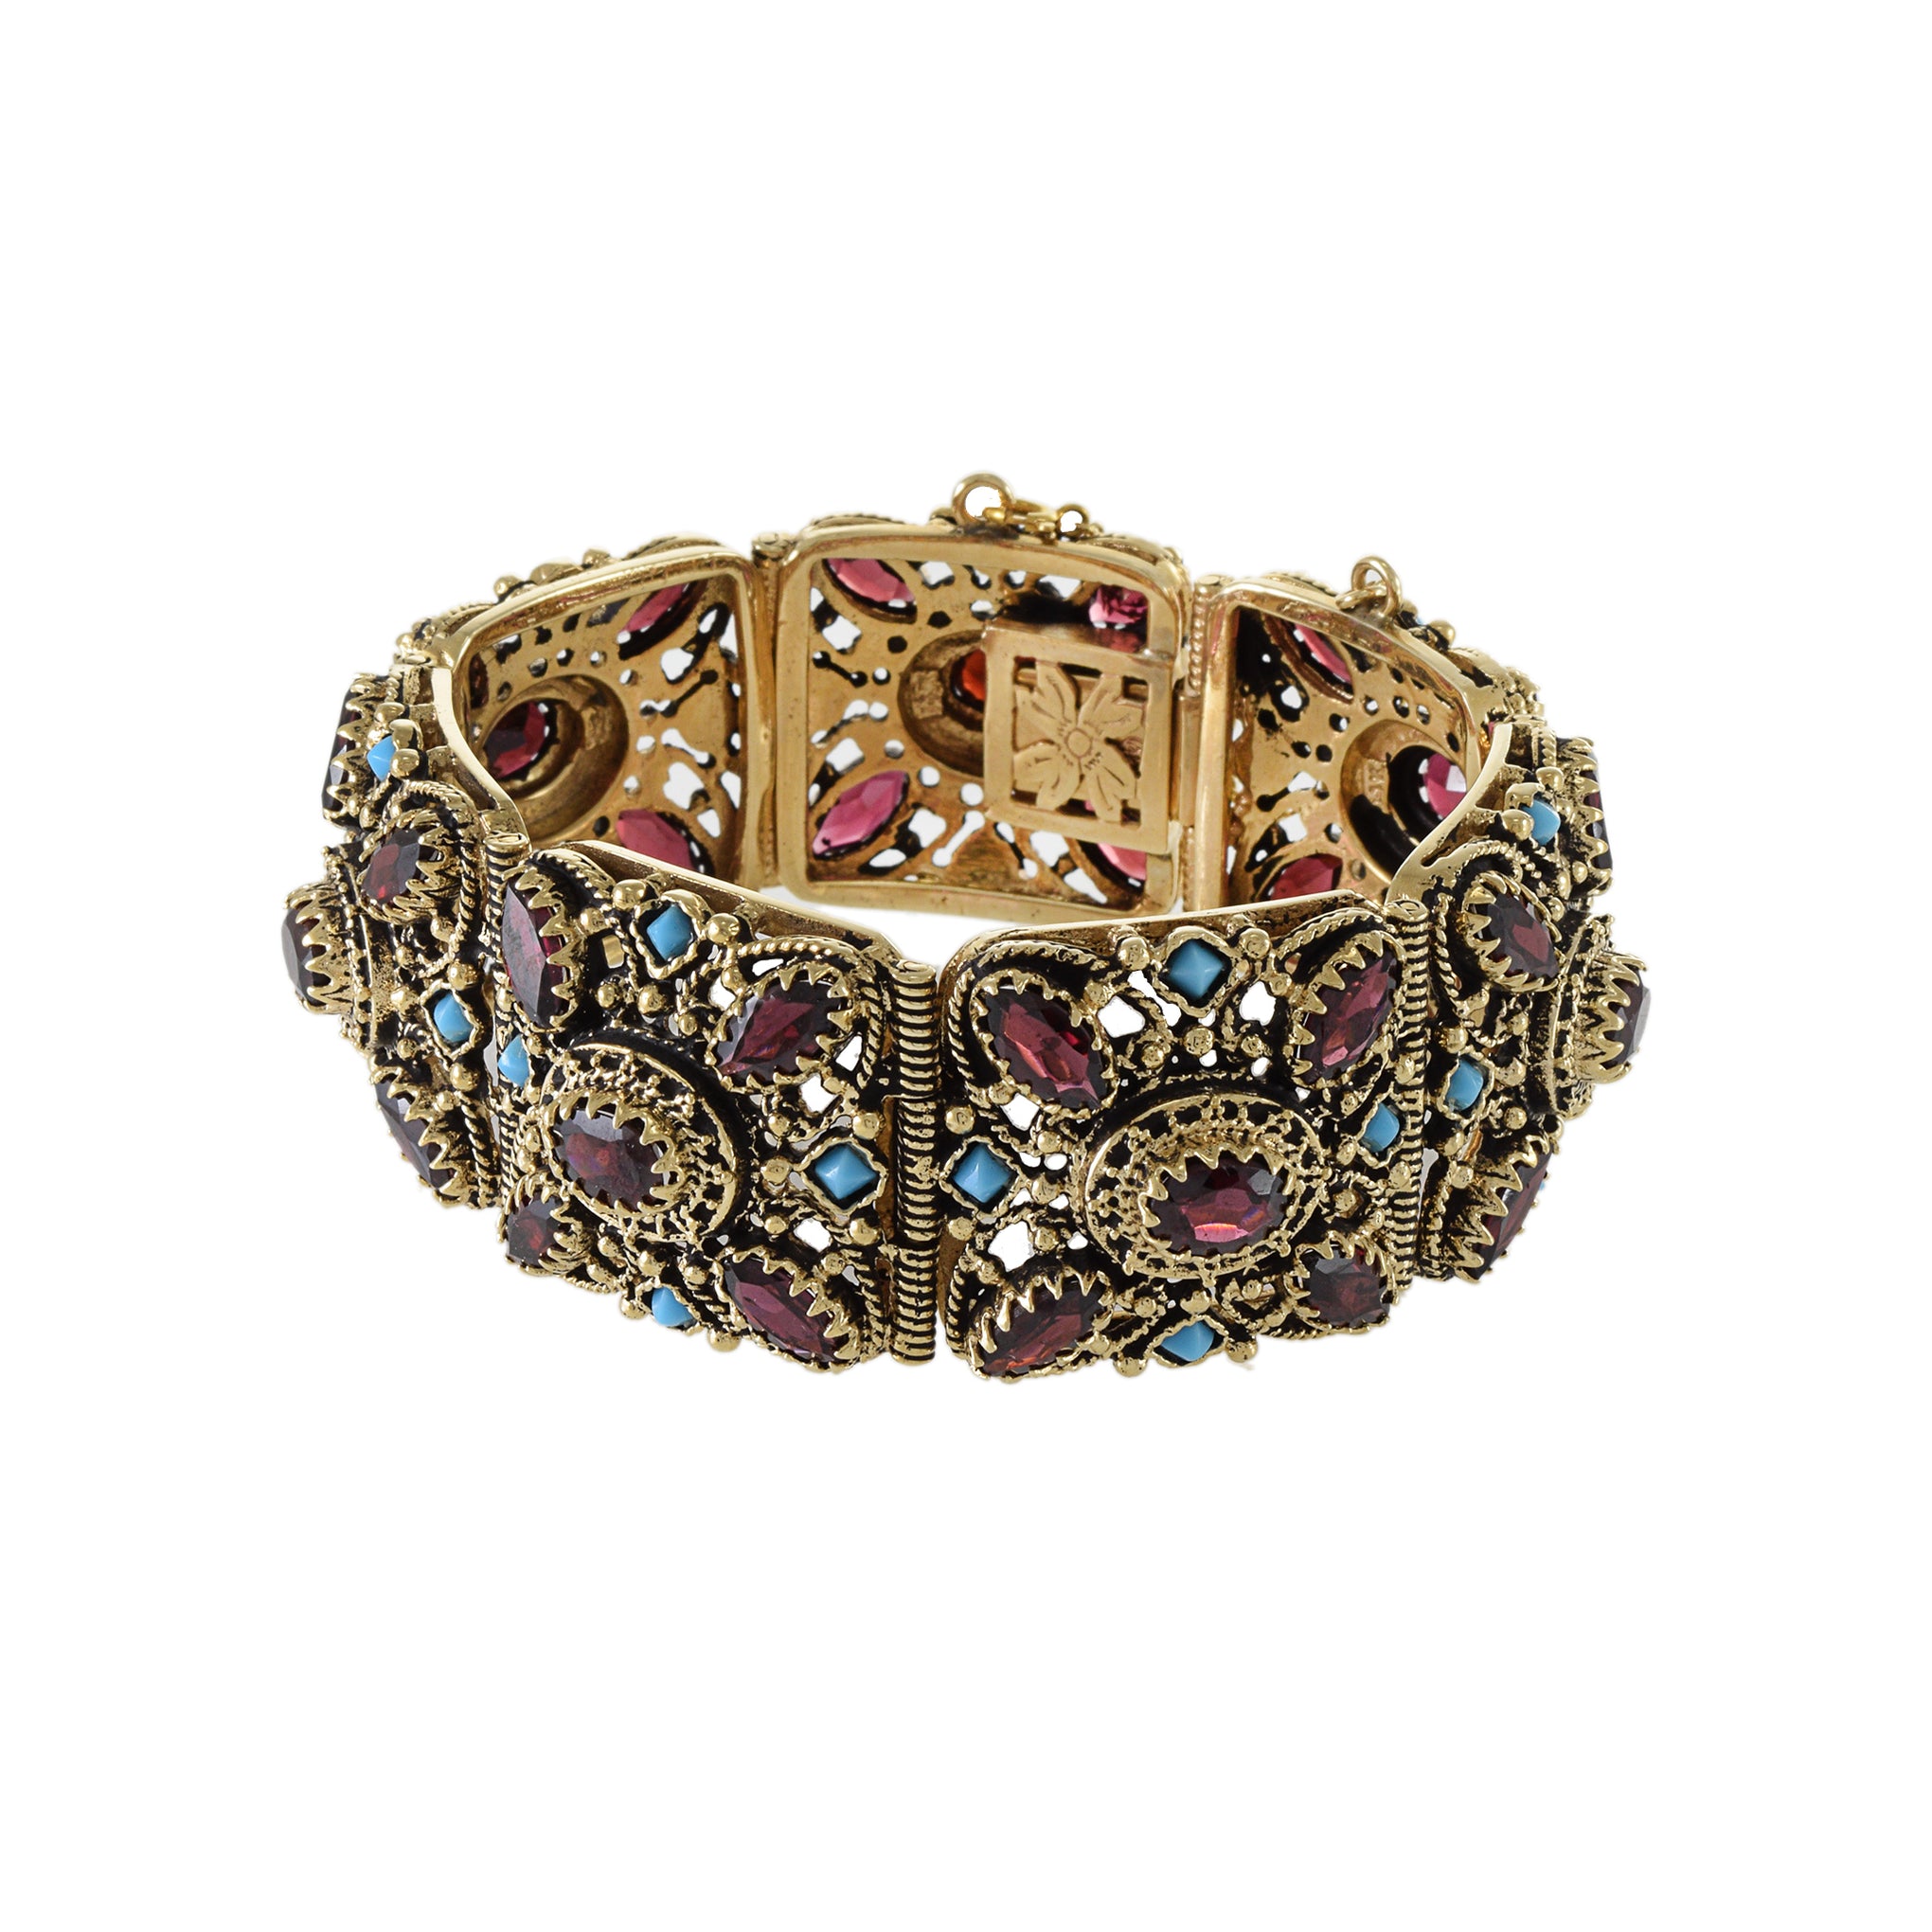 Victorian Era 14KT Yellow Gold Garnet And Turquoise Wide Section Bracelet